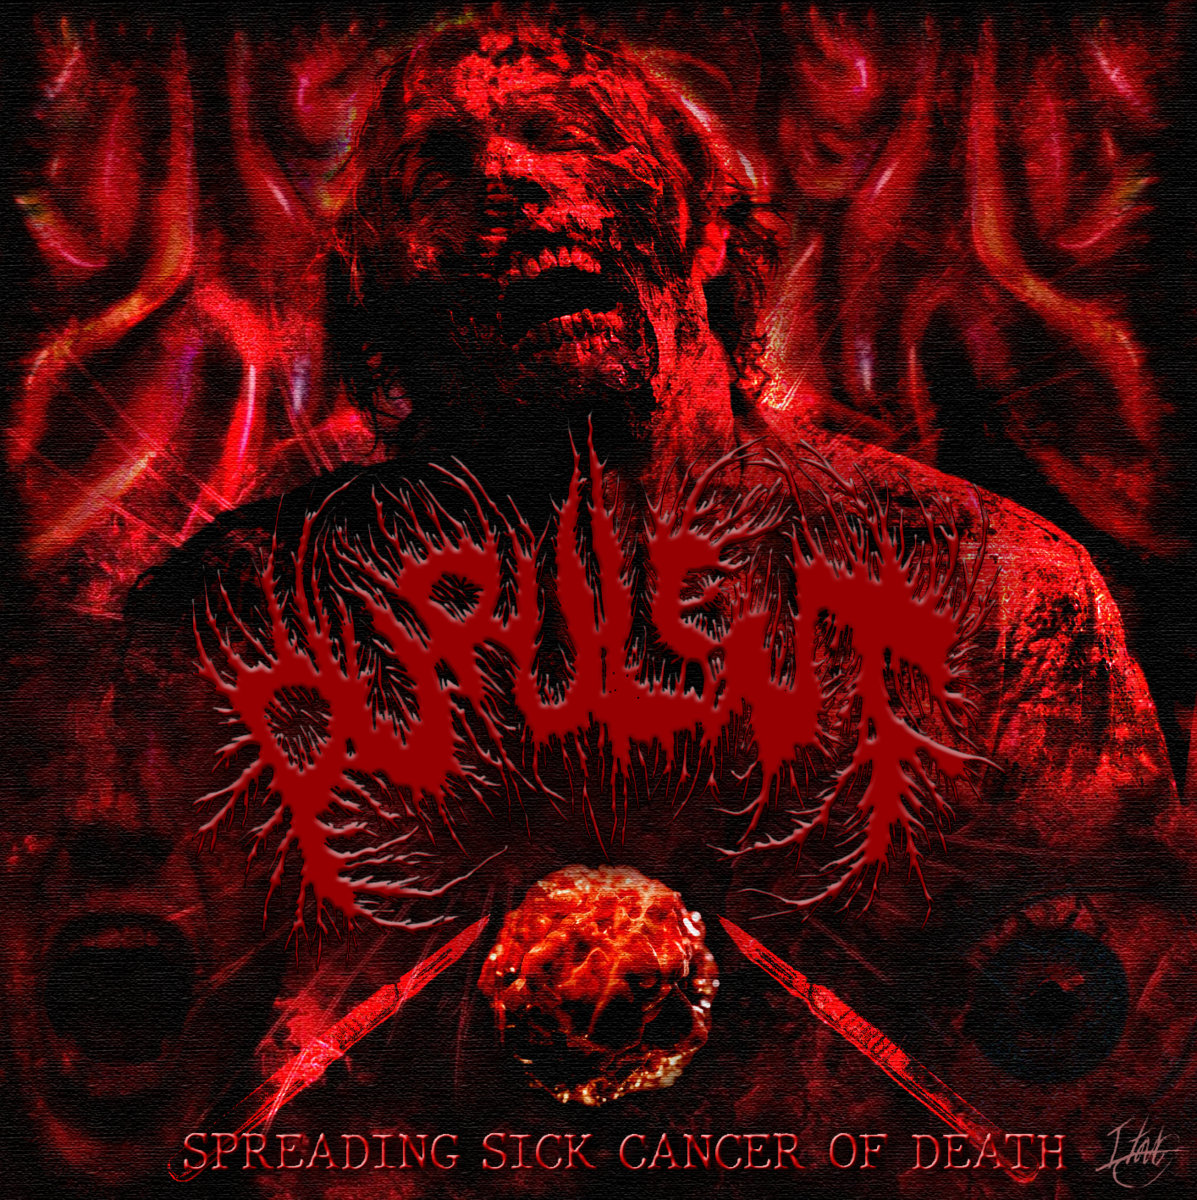 Purulent - Spreading Sick Cancer of Death